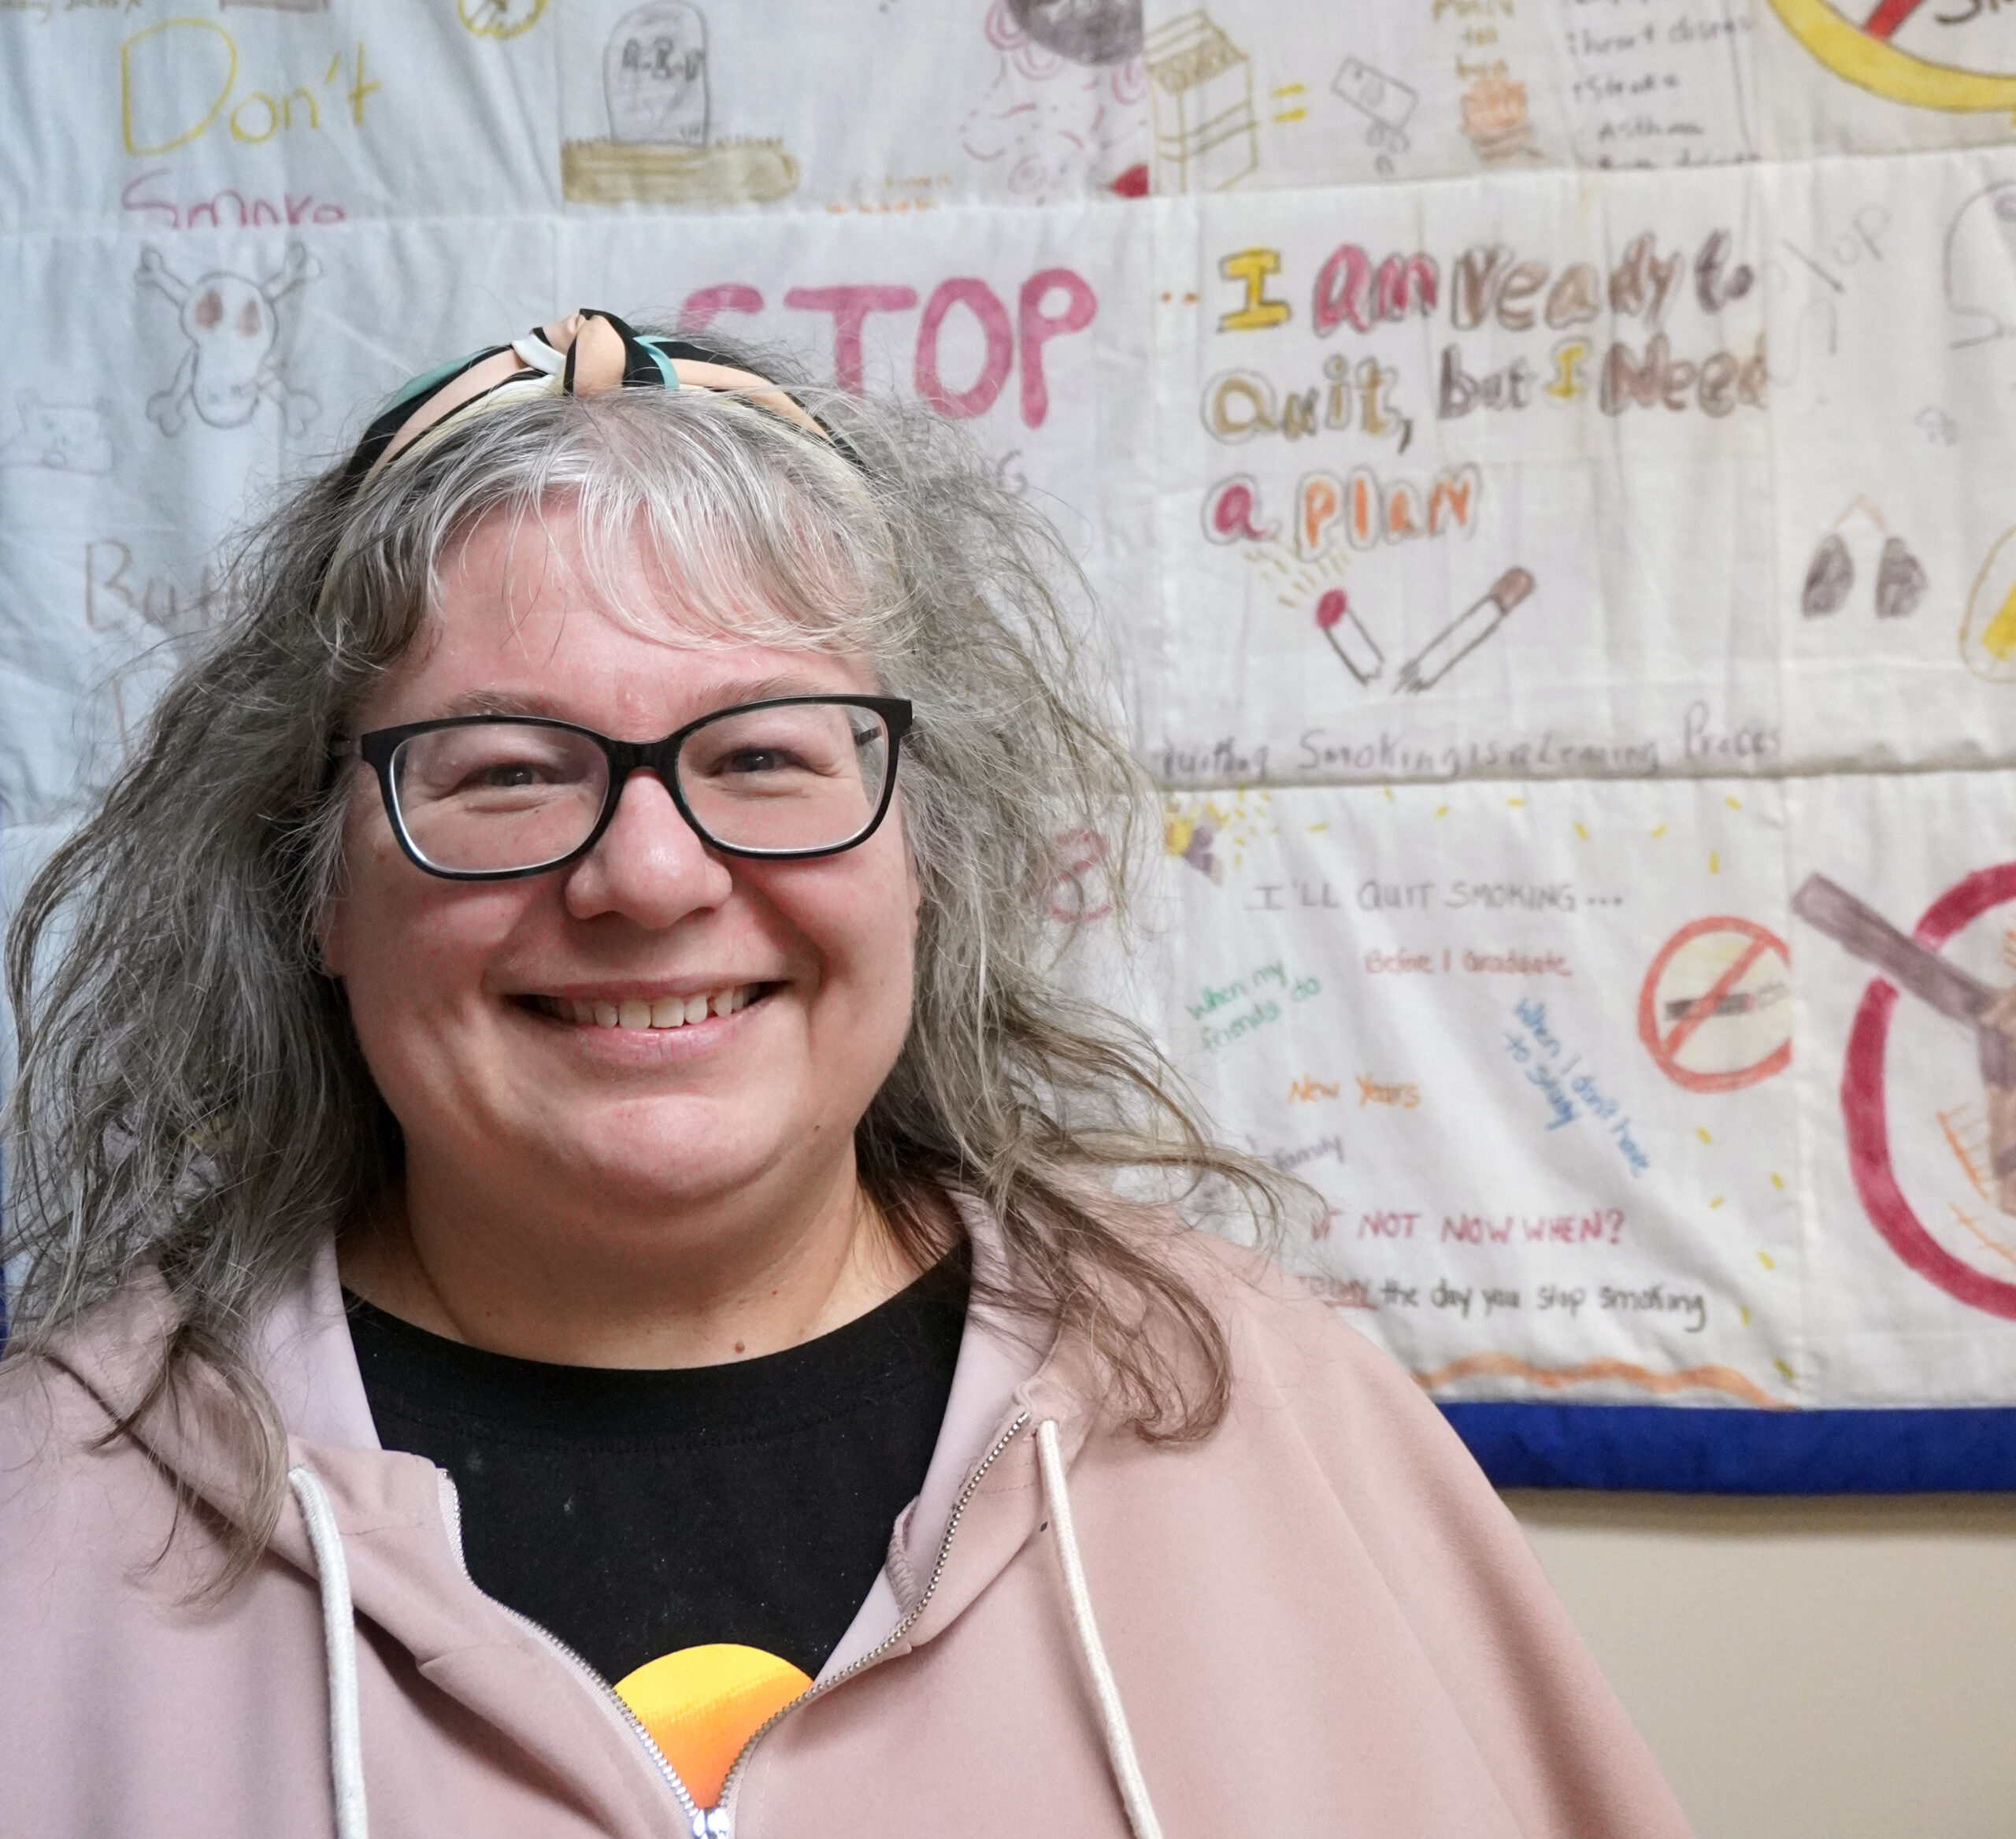 Melissa Moore is the program and education coordinator at The Newfoundland and Labrador Alliance for the Control of Tobacco. Standing in front of a stop smoking whiteboard made by kids with a big smile on her face, addressing the concern of the increasing vape rate among young people,